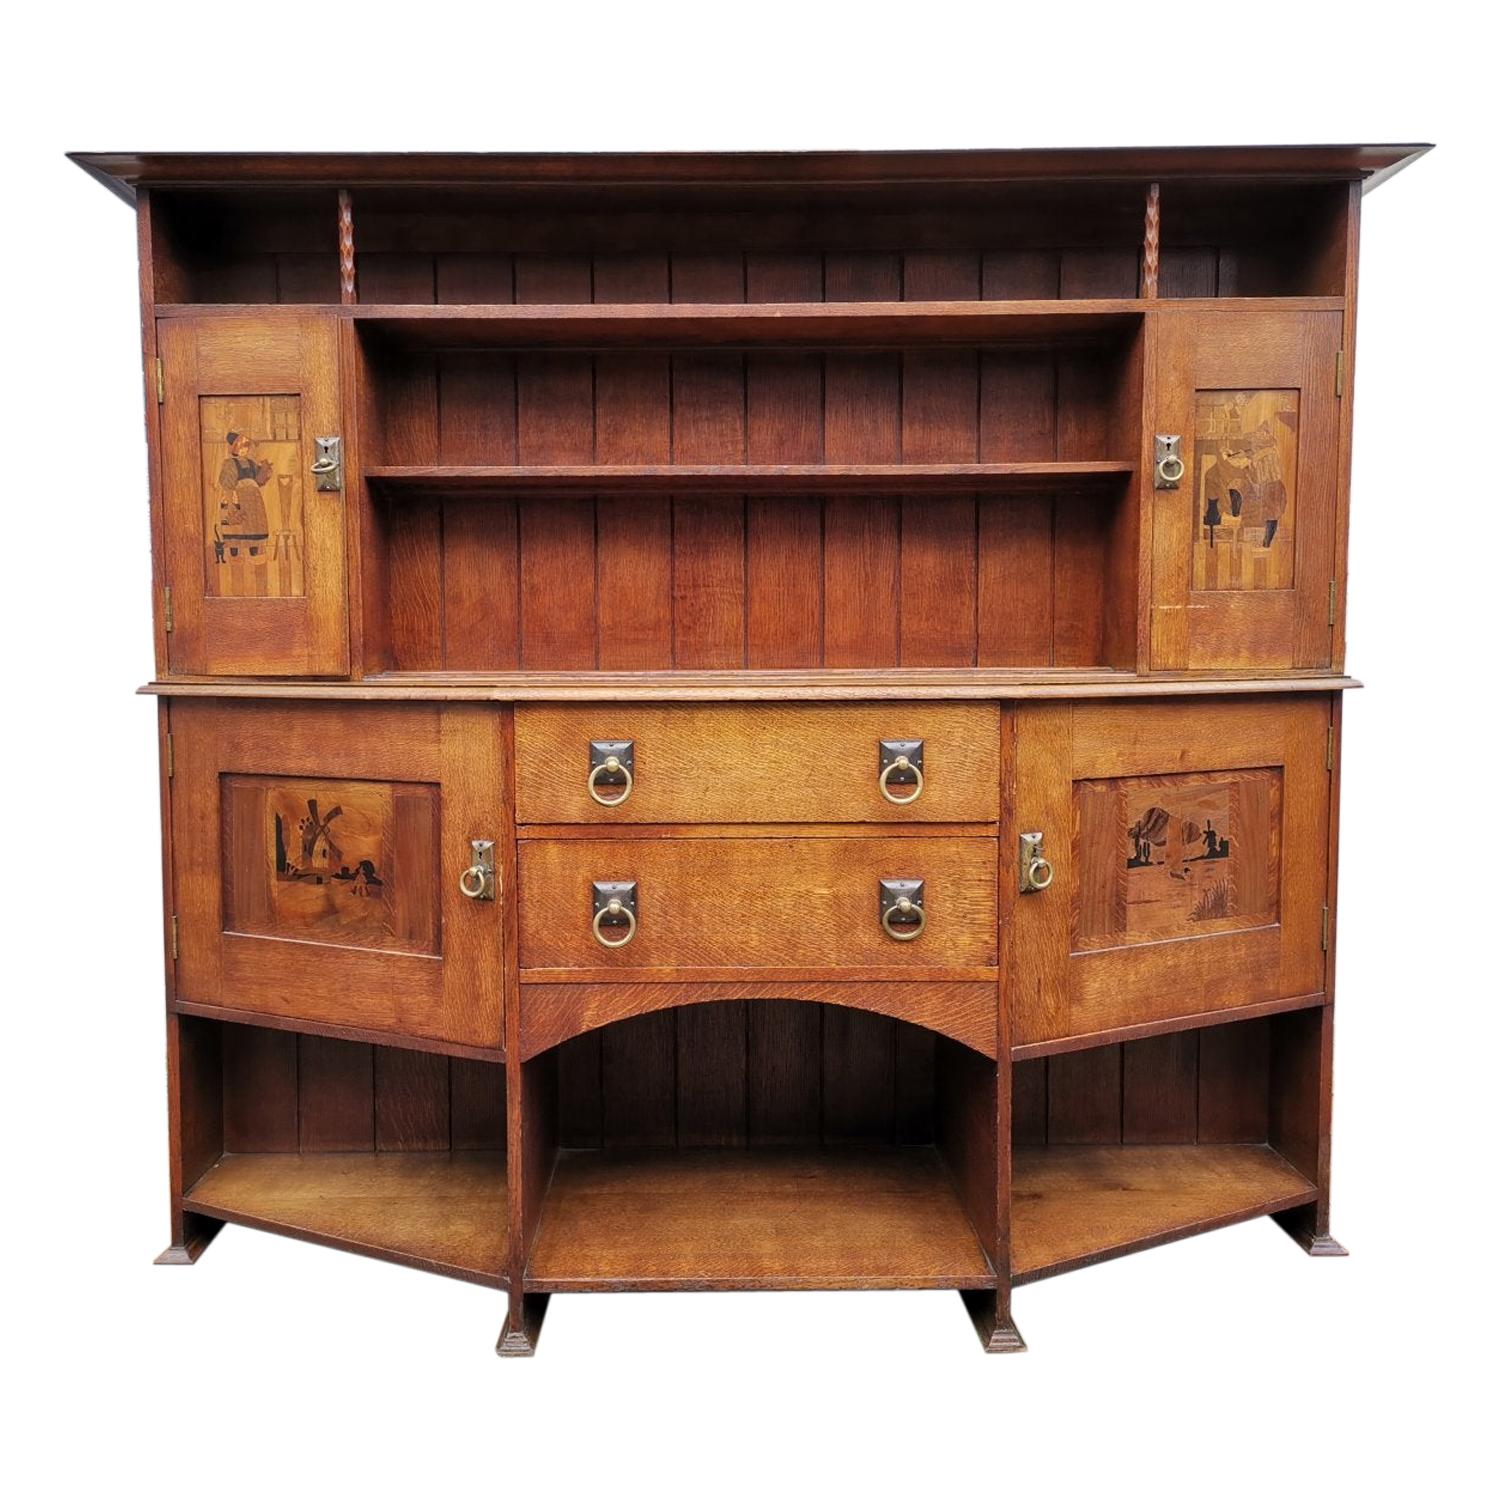 Bath Cabinet Makers, an Arts & Crafts Oak Sideboard with Dutch Inlaid Scenes